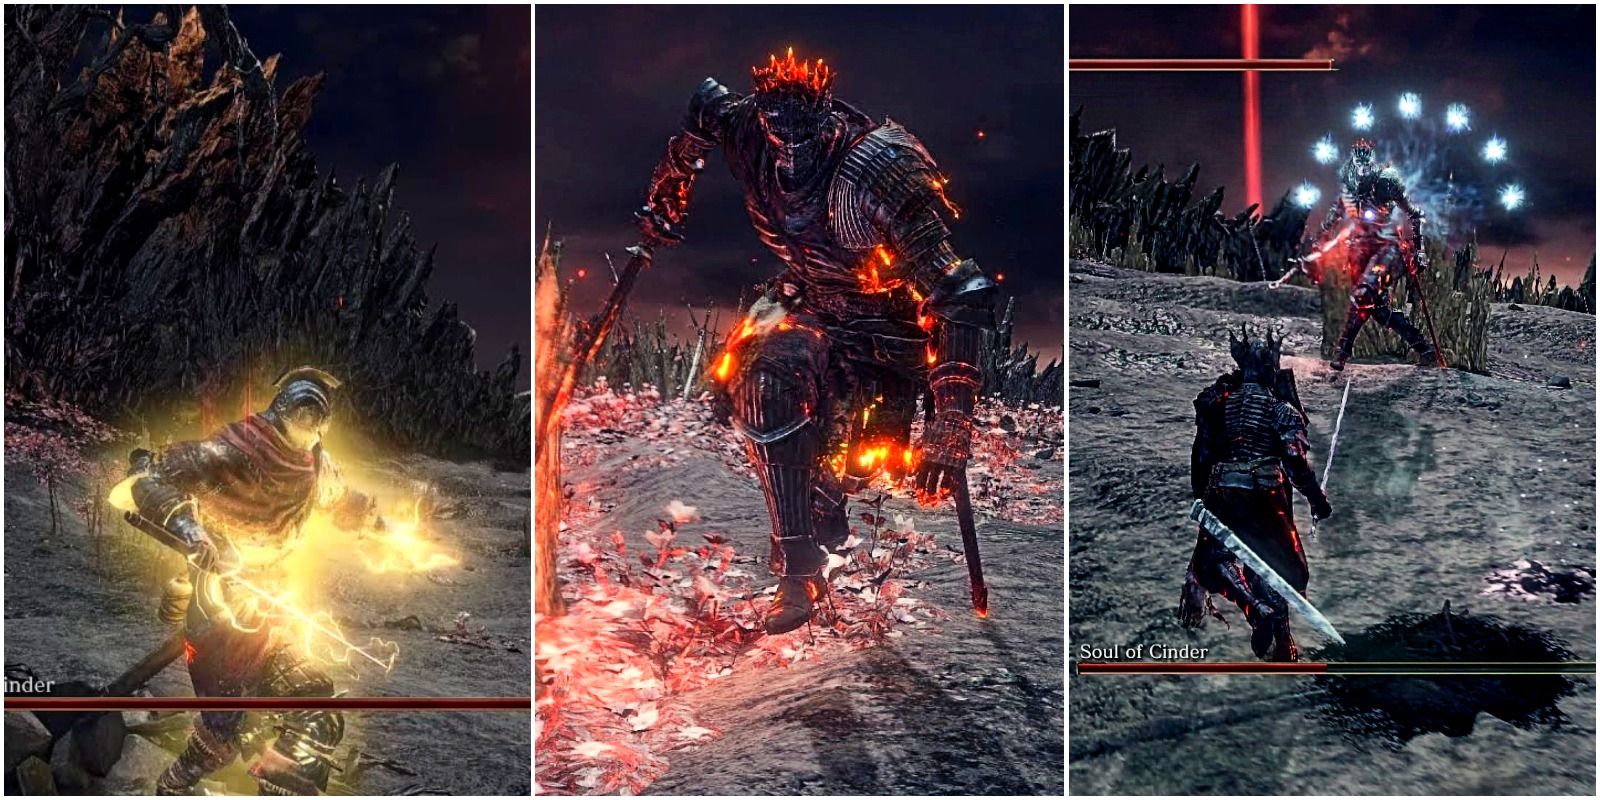 player casting a lightning spell, the soul of cinder, and the sould of cinder in mage mode.